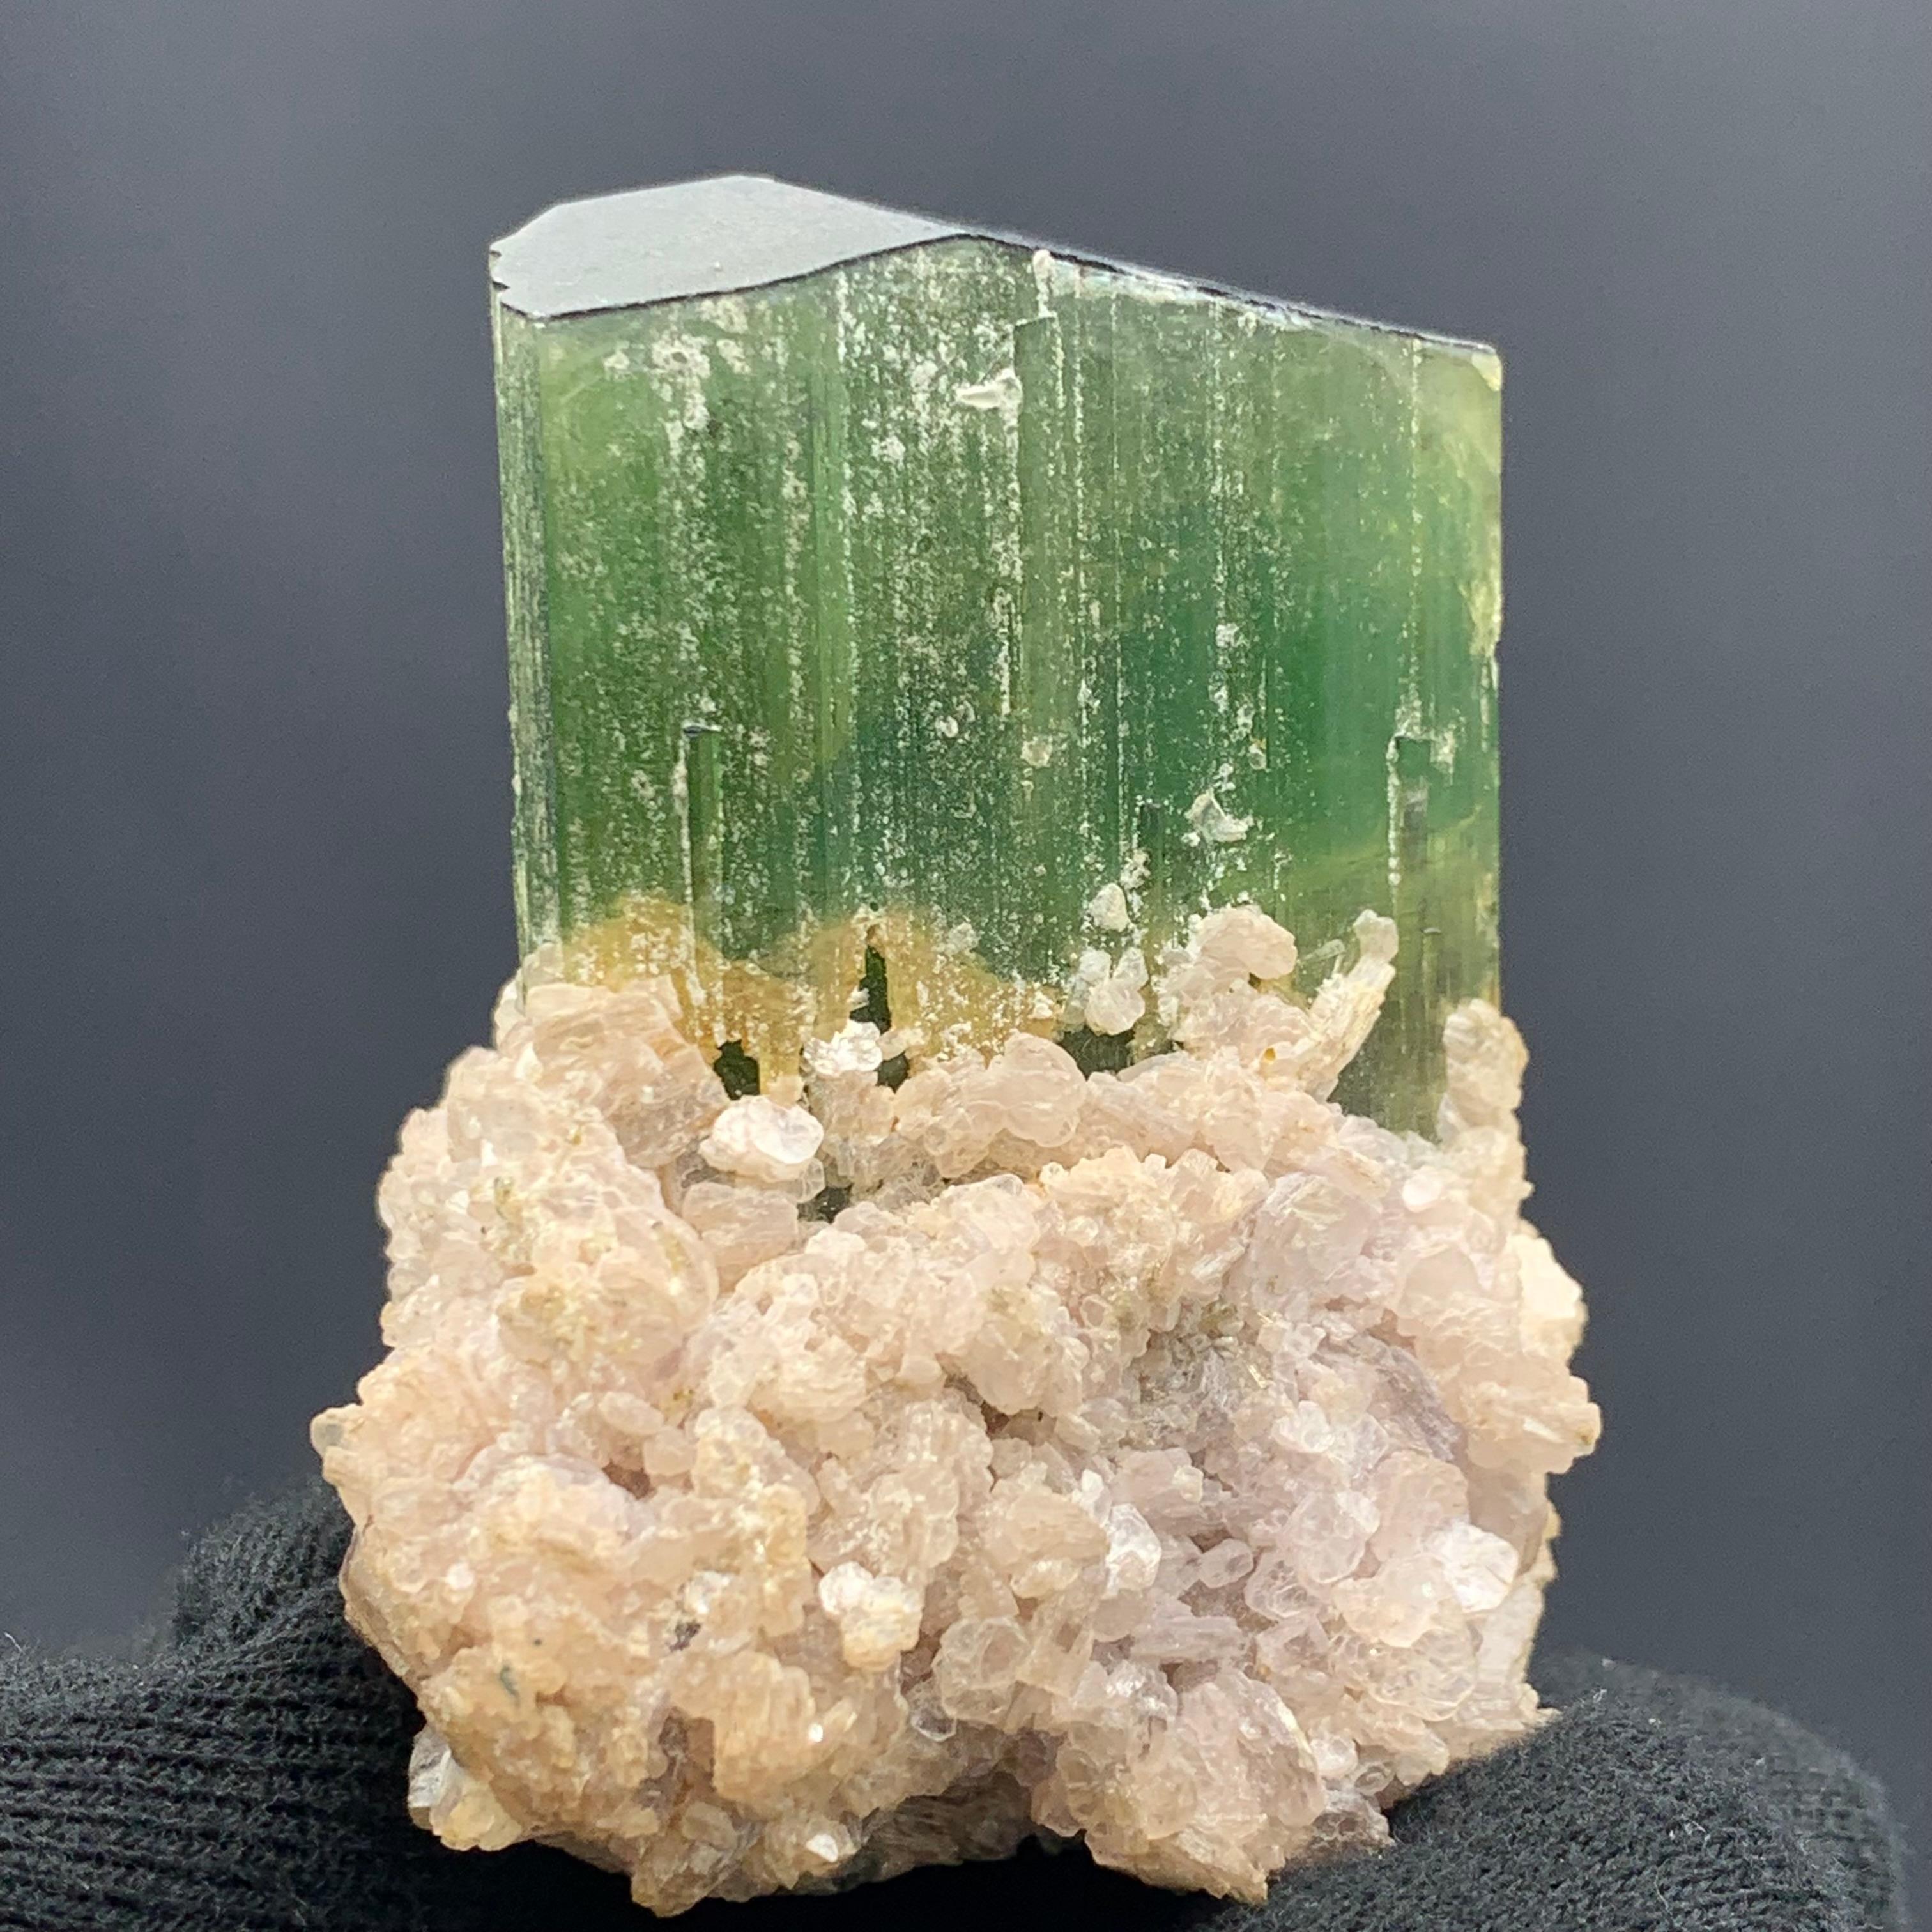 174.58 Gram Incredible Green Tourmaline Specimen From Paprok, Afghanistan 

Weight: 174.58 Gram 
Dimension: 5.8 x 5.4 x 4.7 Cm 
Origin: Paprok, Nooristan Province, Afghanistan 

Tourmaline is a crystalline silicate mineral group in which boron is